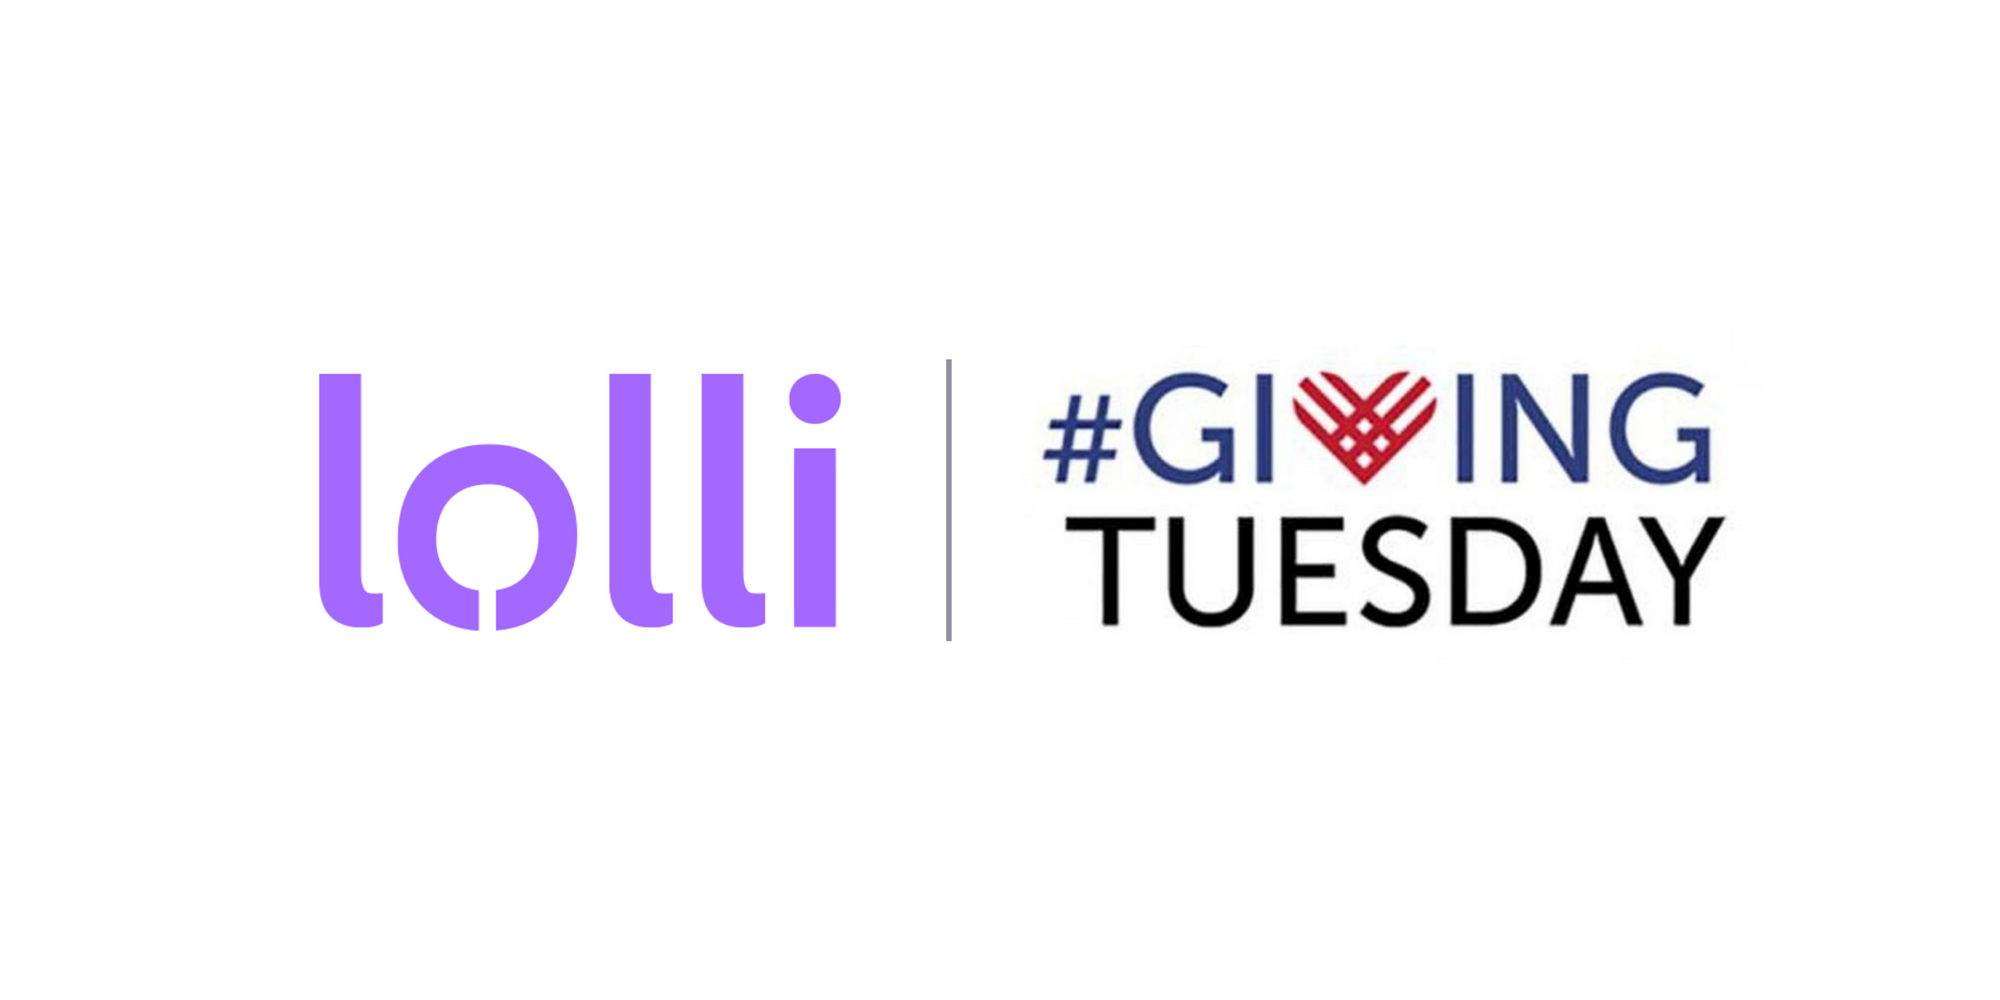 Giving Tuesday: Nominate Someone to Win 1 Million Sats! 💜